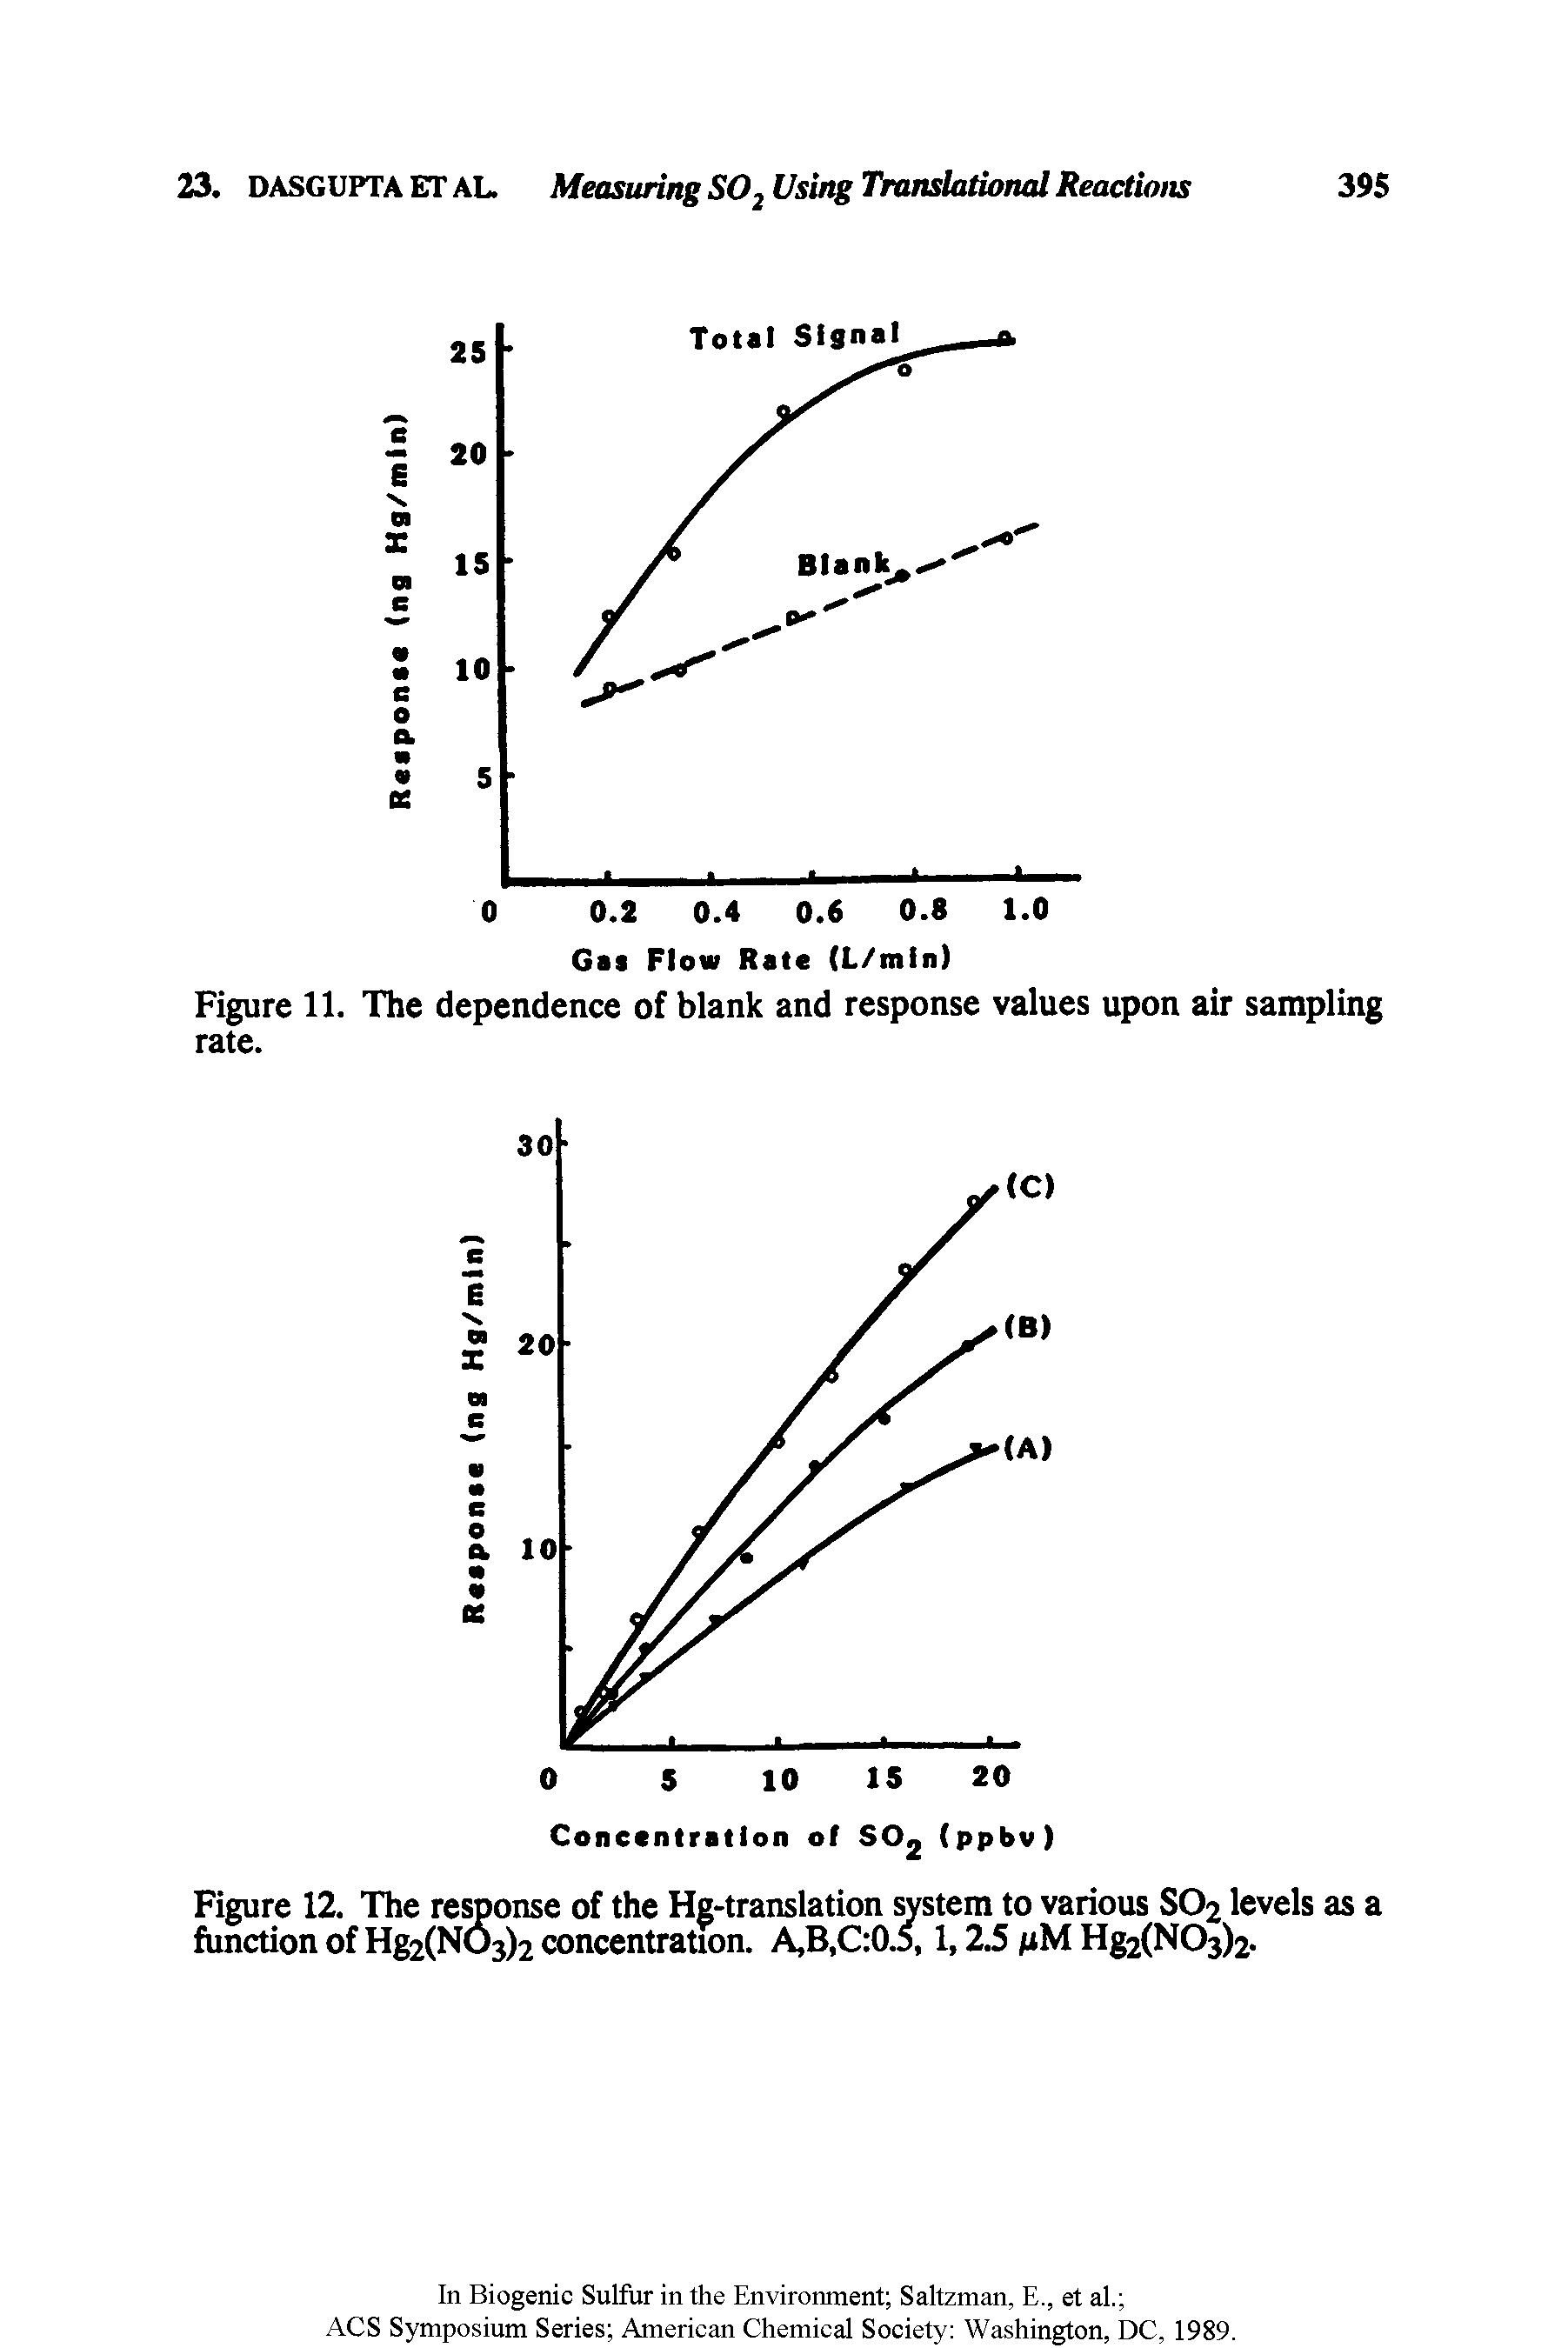 Figure 11. The dependence of blank and response values upon air sampling rate.